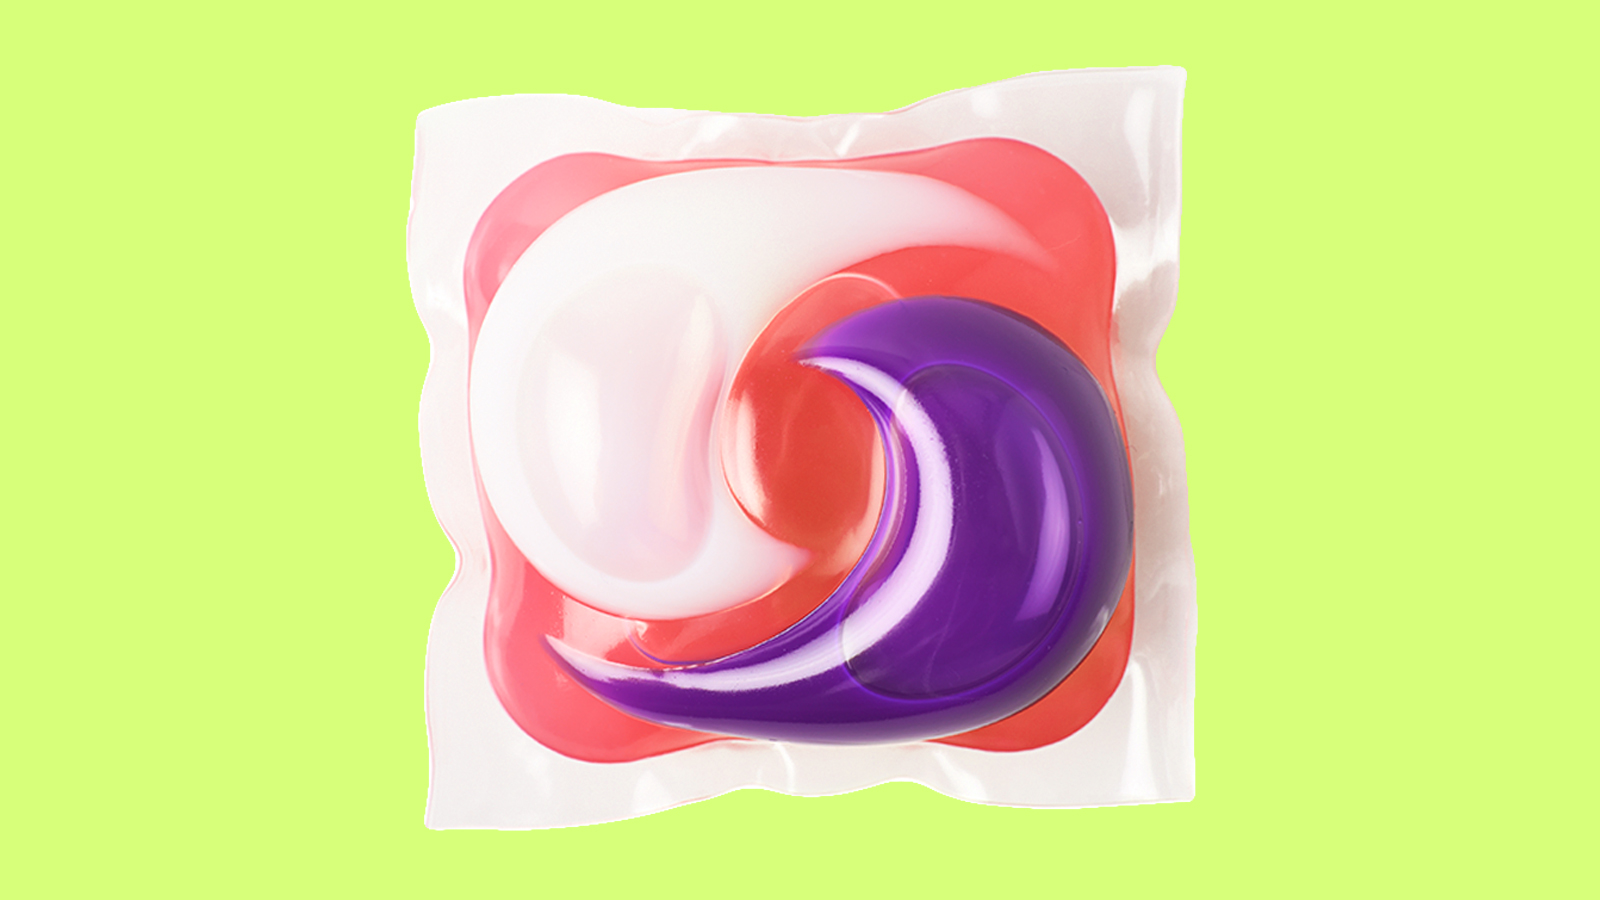 Detergent pods are handy, but can I use them with a clean conscience?